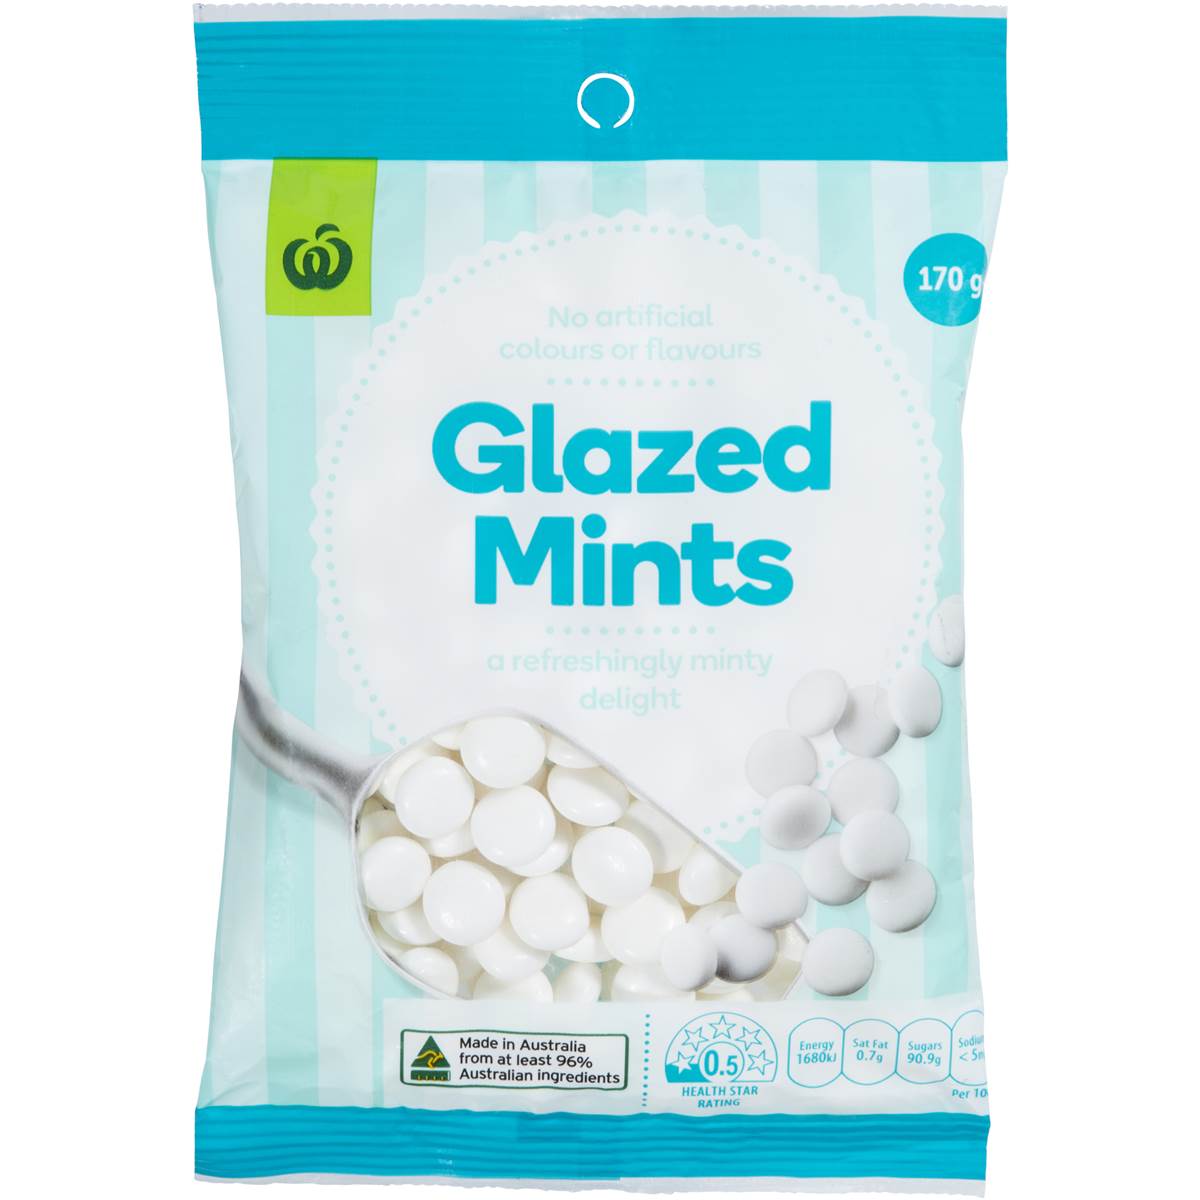 Calories in Woolworths Glazed Mints